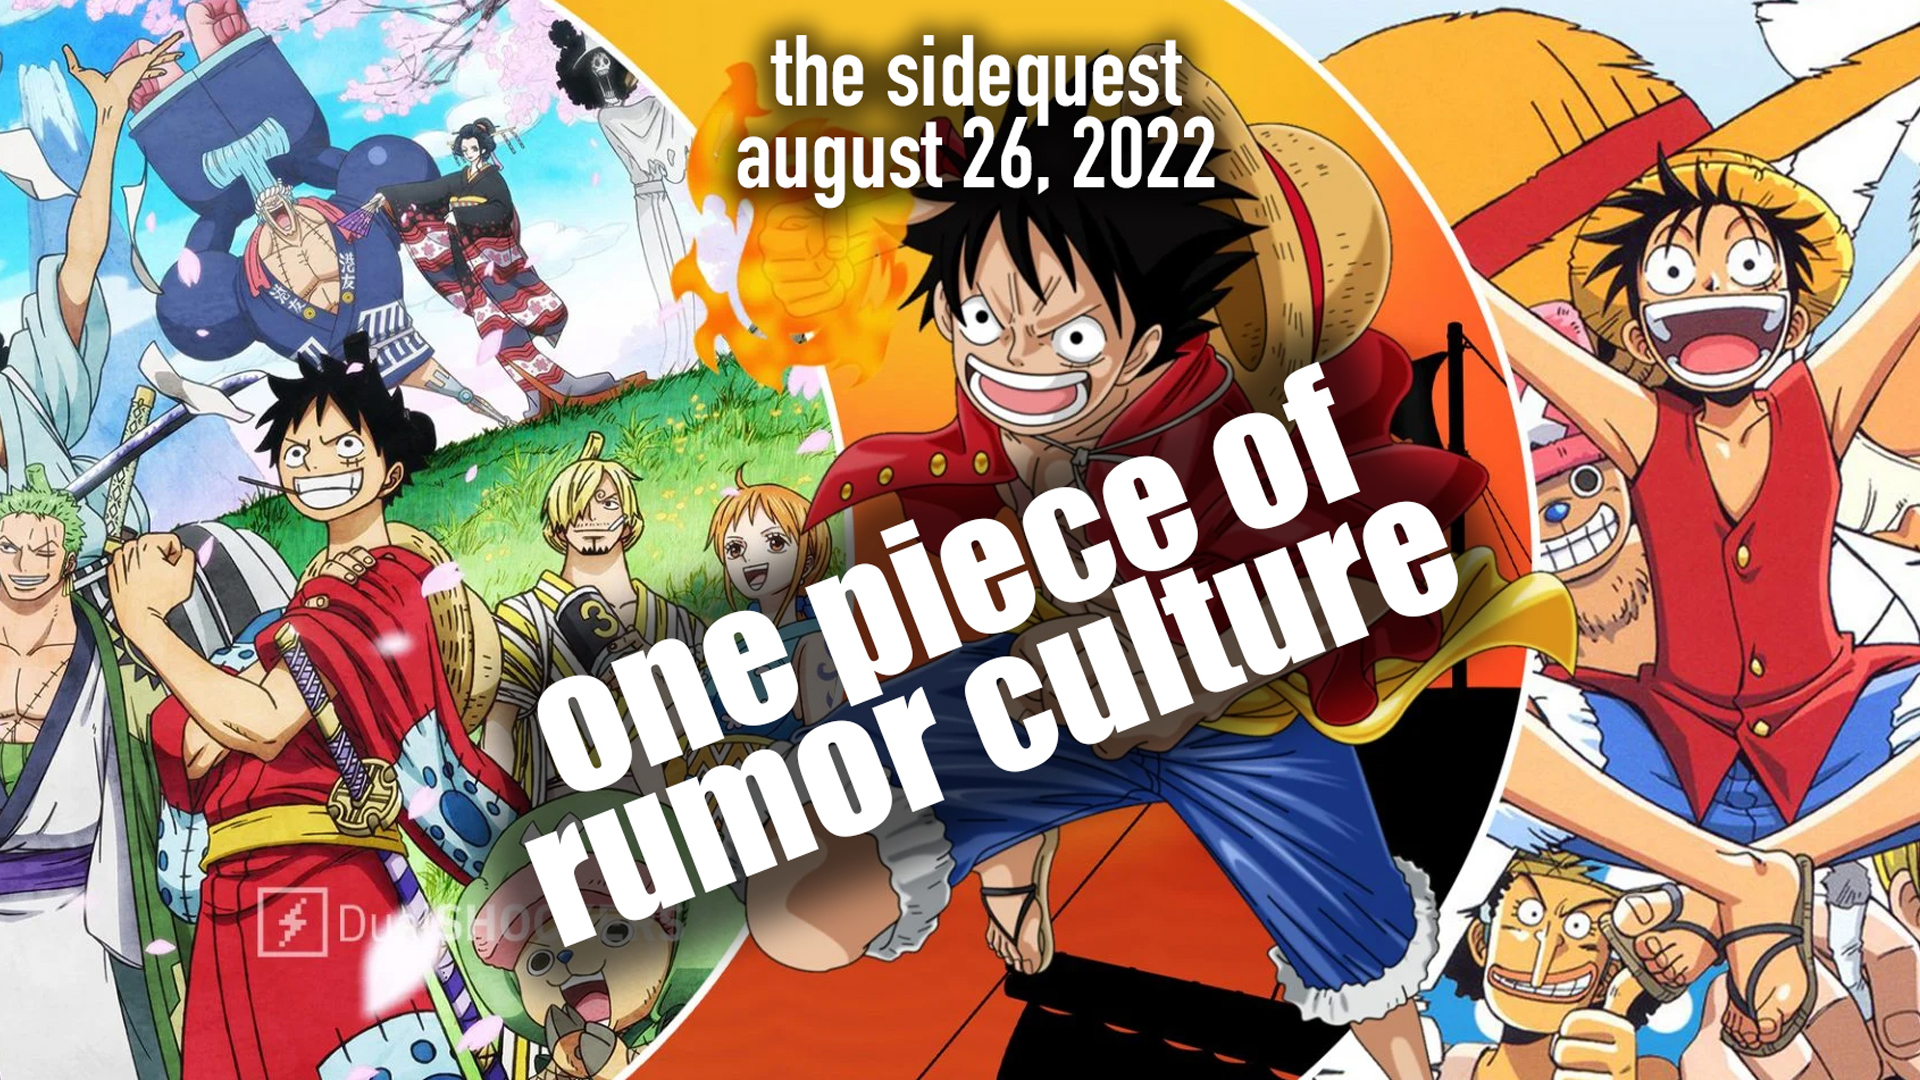 The SideQuest LIVE! August 26, 2022: One Piece of Rumor Culture